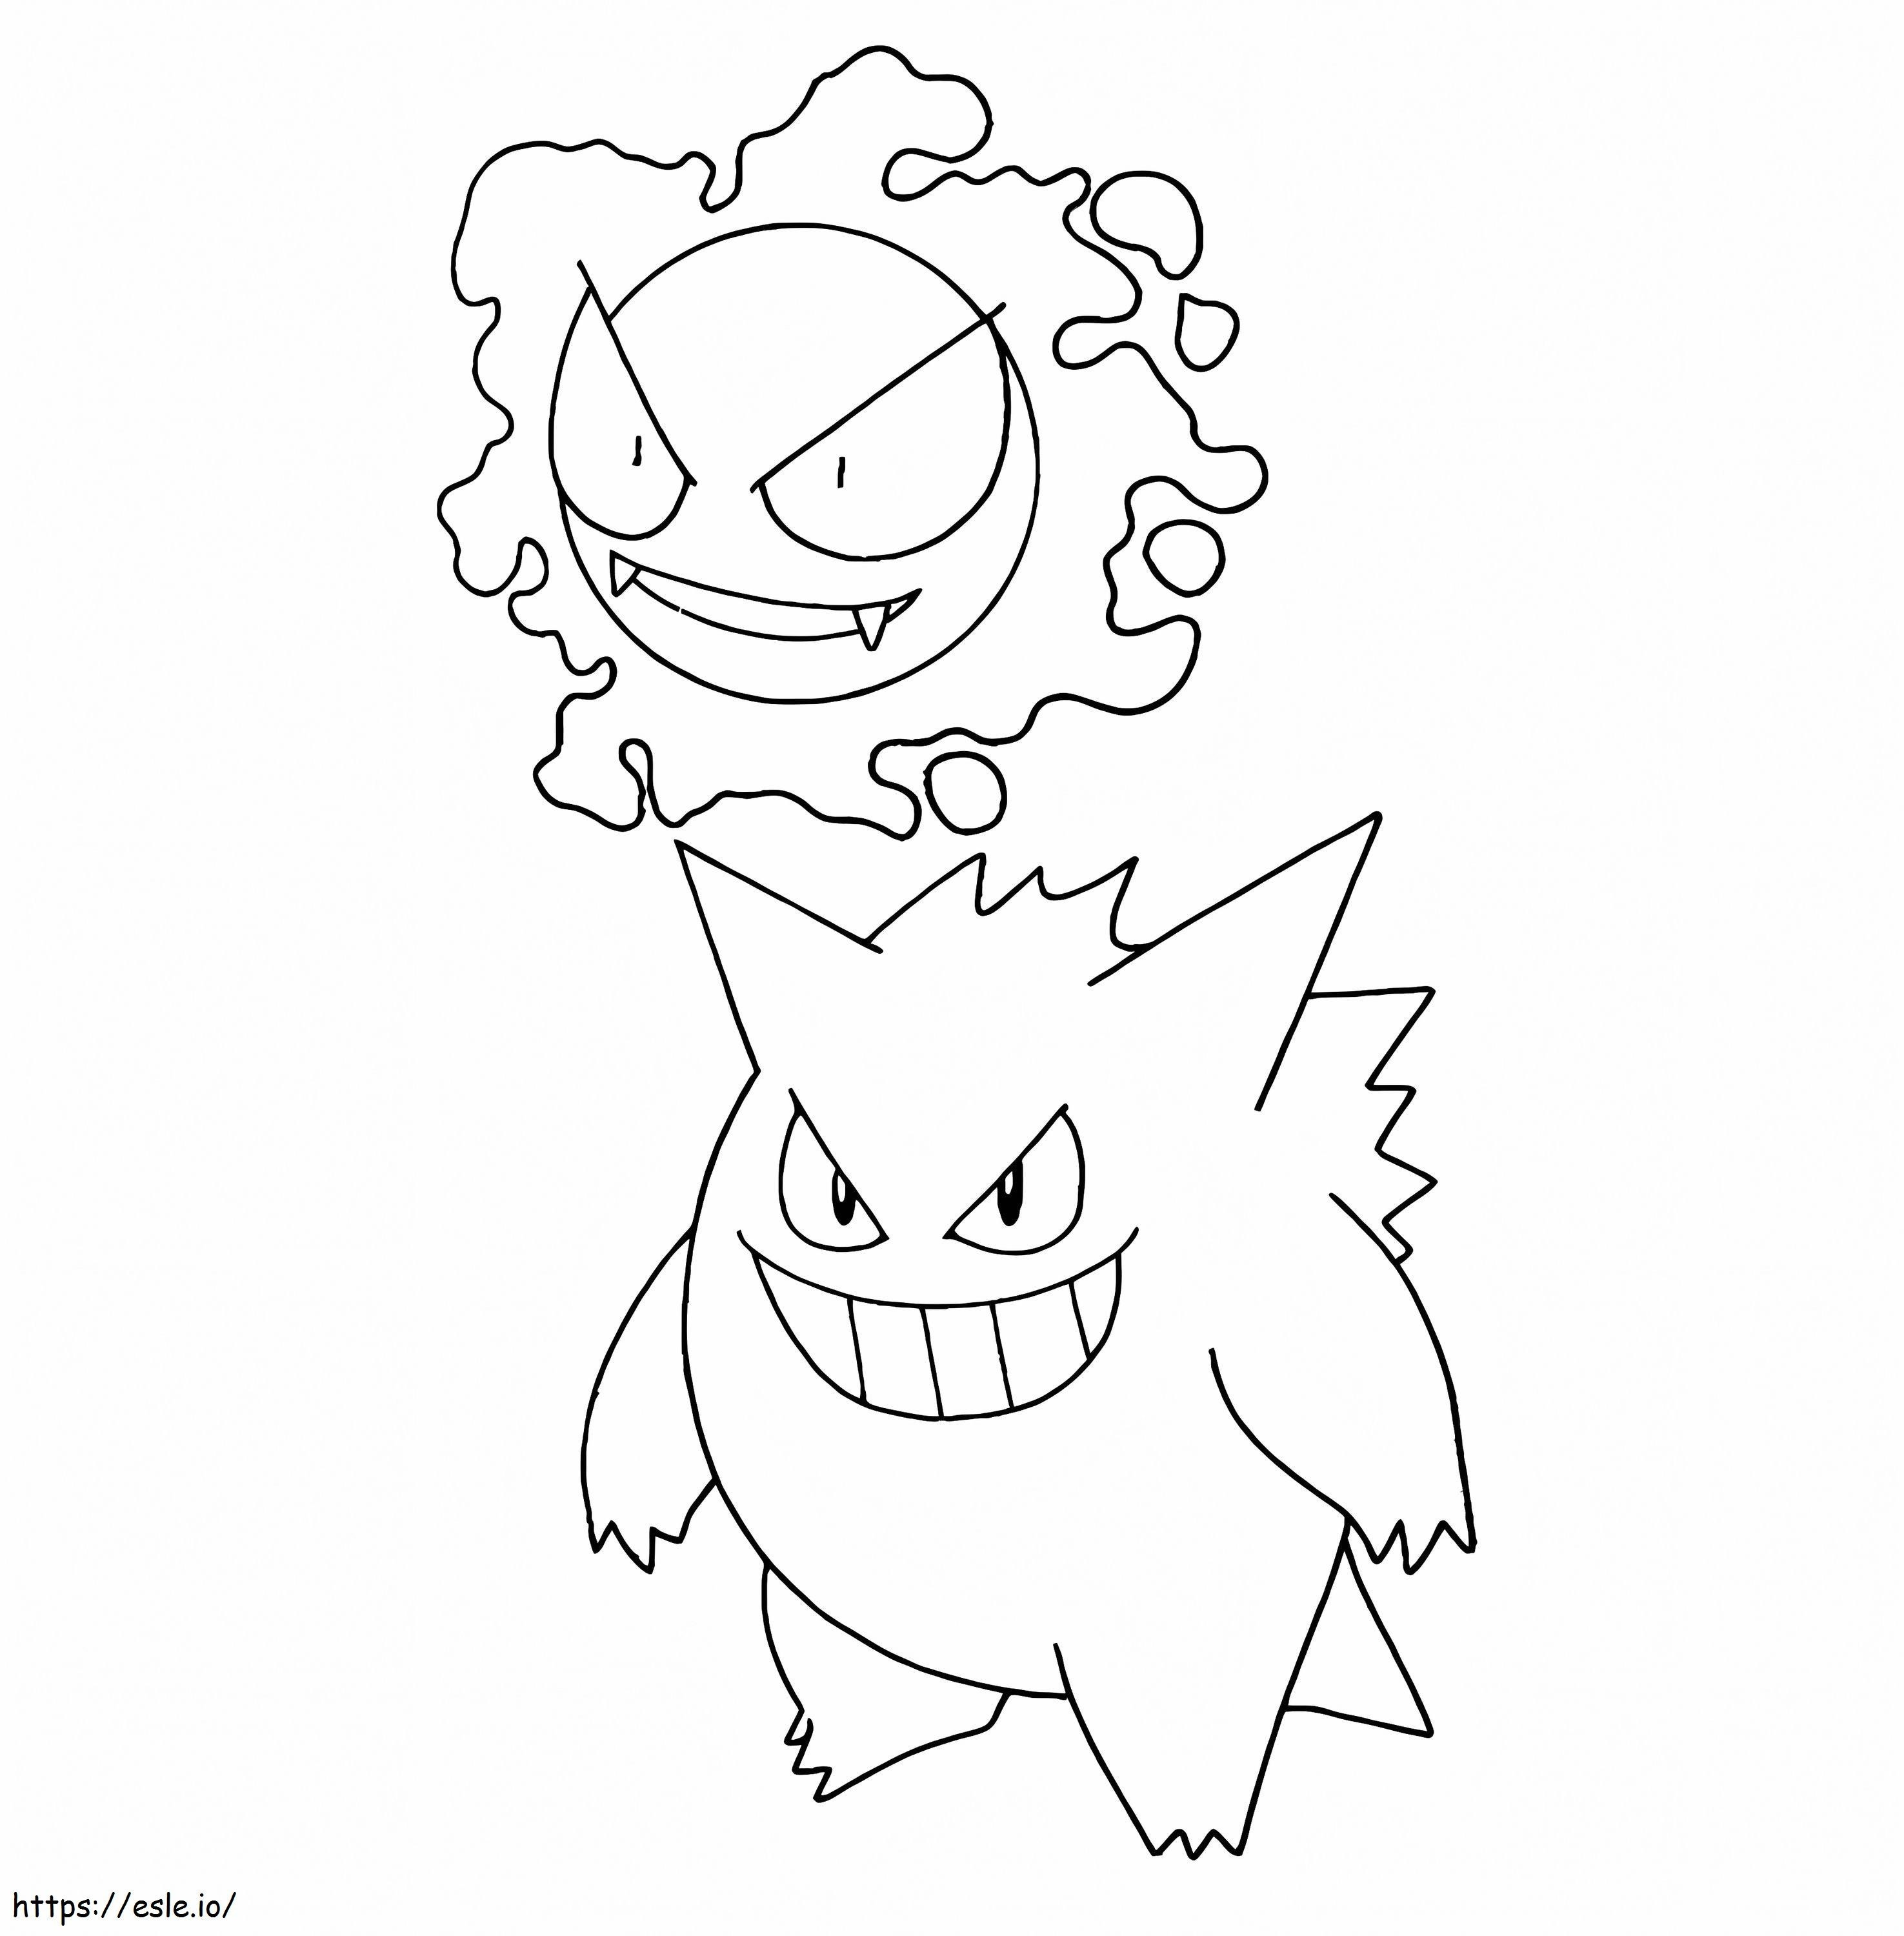 Gastly 5 coloring page